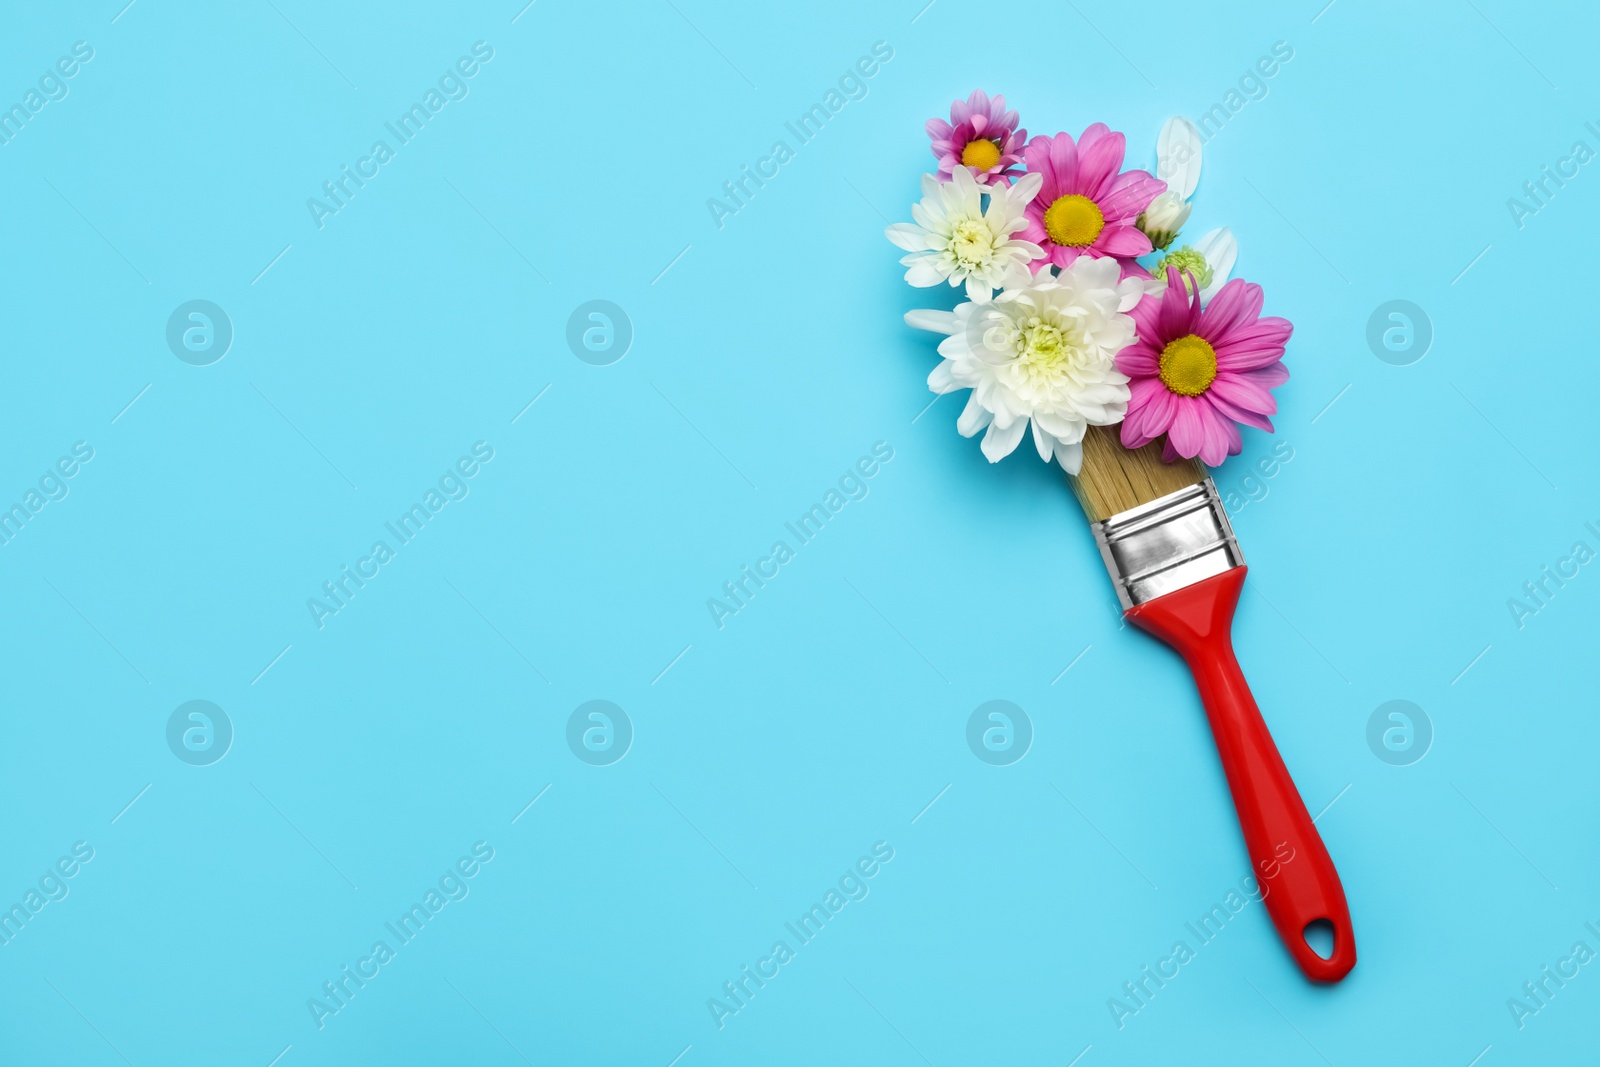 Photo of Brush painting with chrysanthemum flowers on light blue background, top view. Space for text. Creative concept